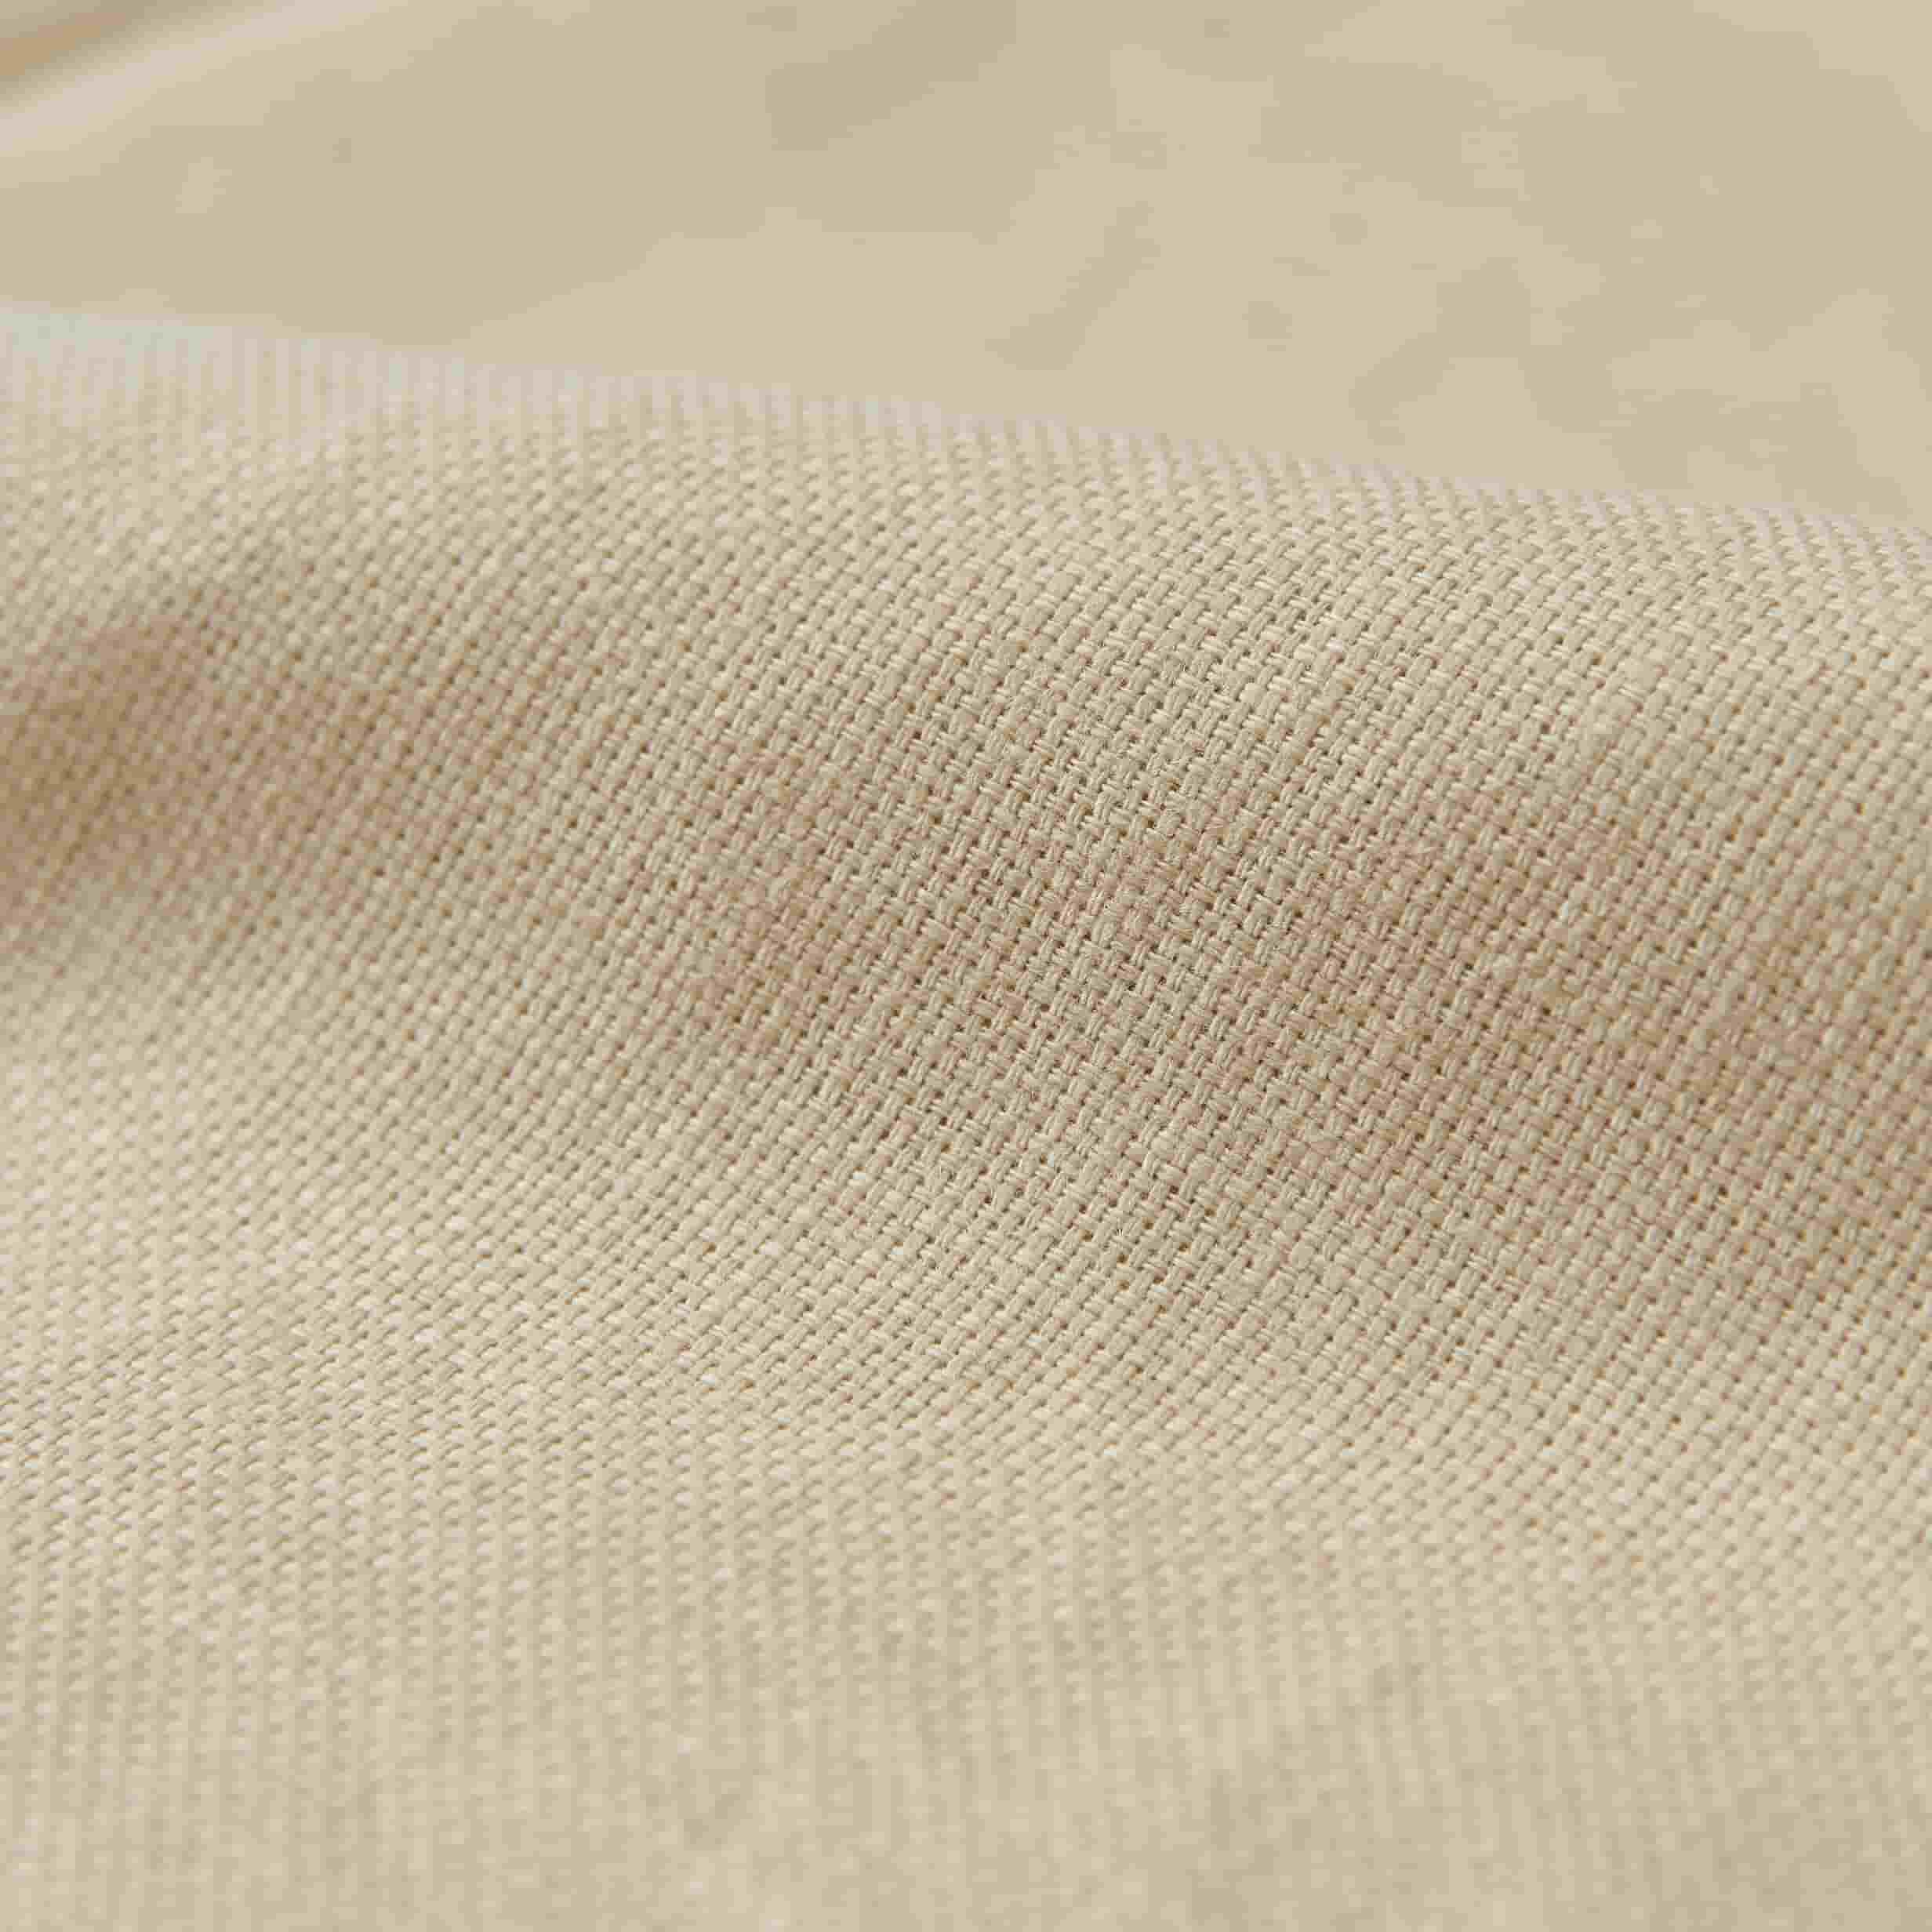 M20710 NORY 100%Linen panel pillow upholstery curtain